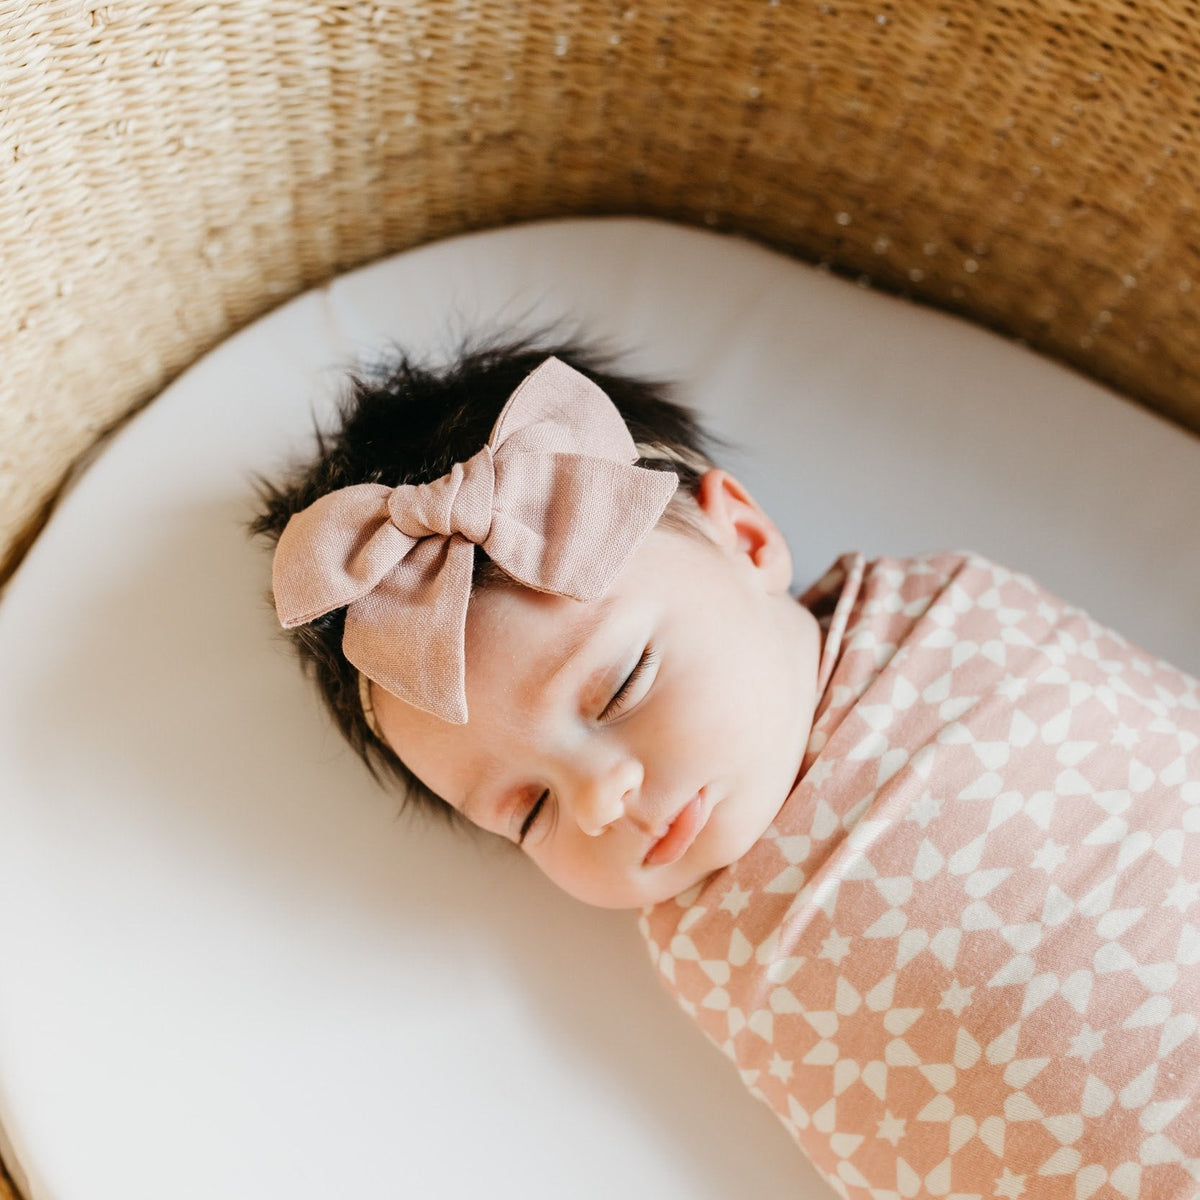 Copper Pearl Knit Swaddle Blanket | Star